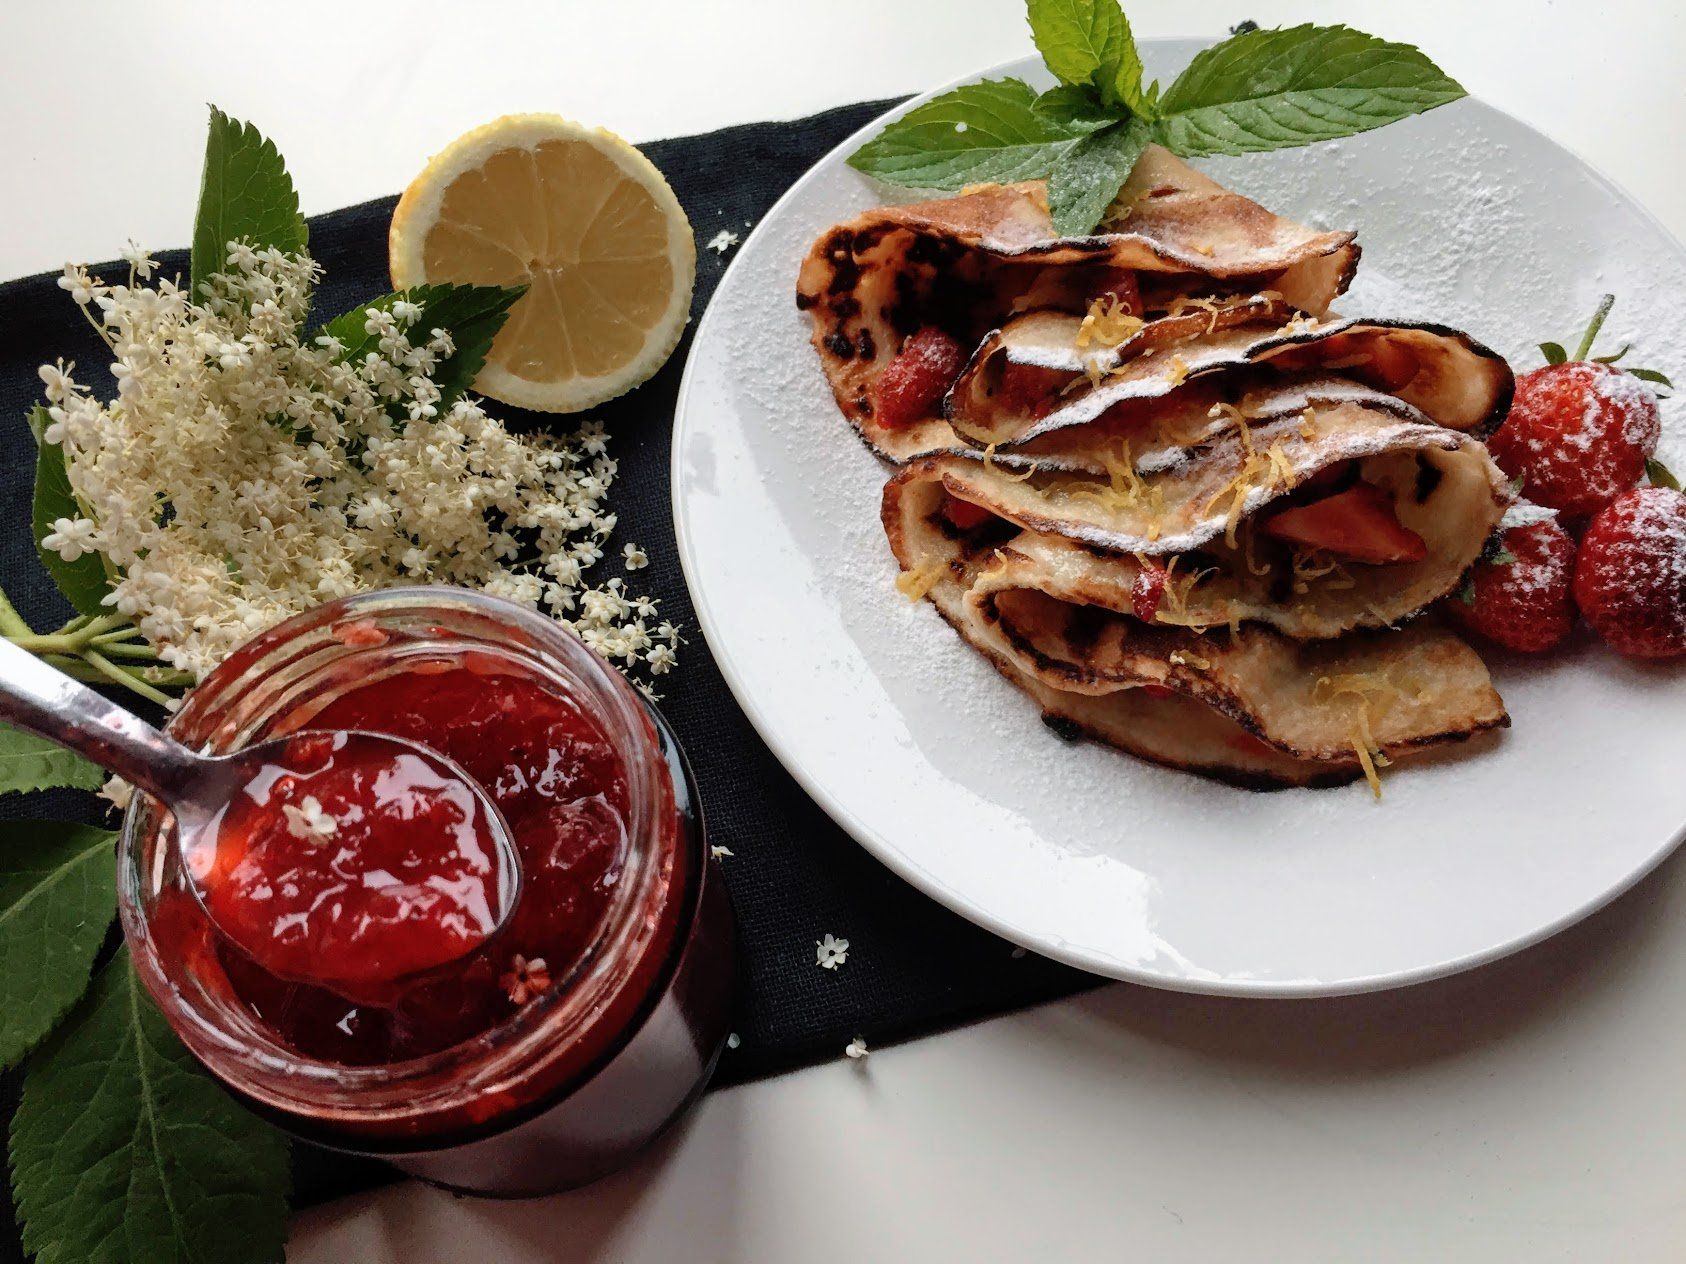 Eggless crepes filled with homemade strawberry and elderflower jam